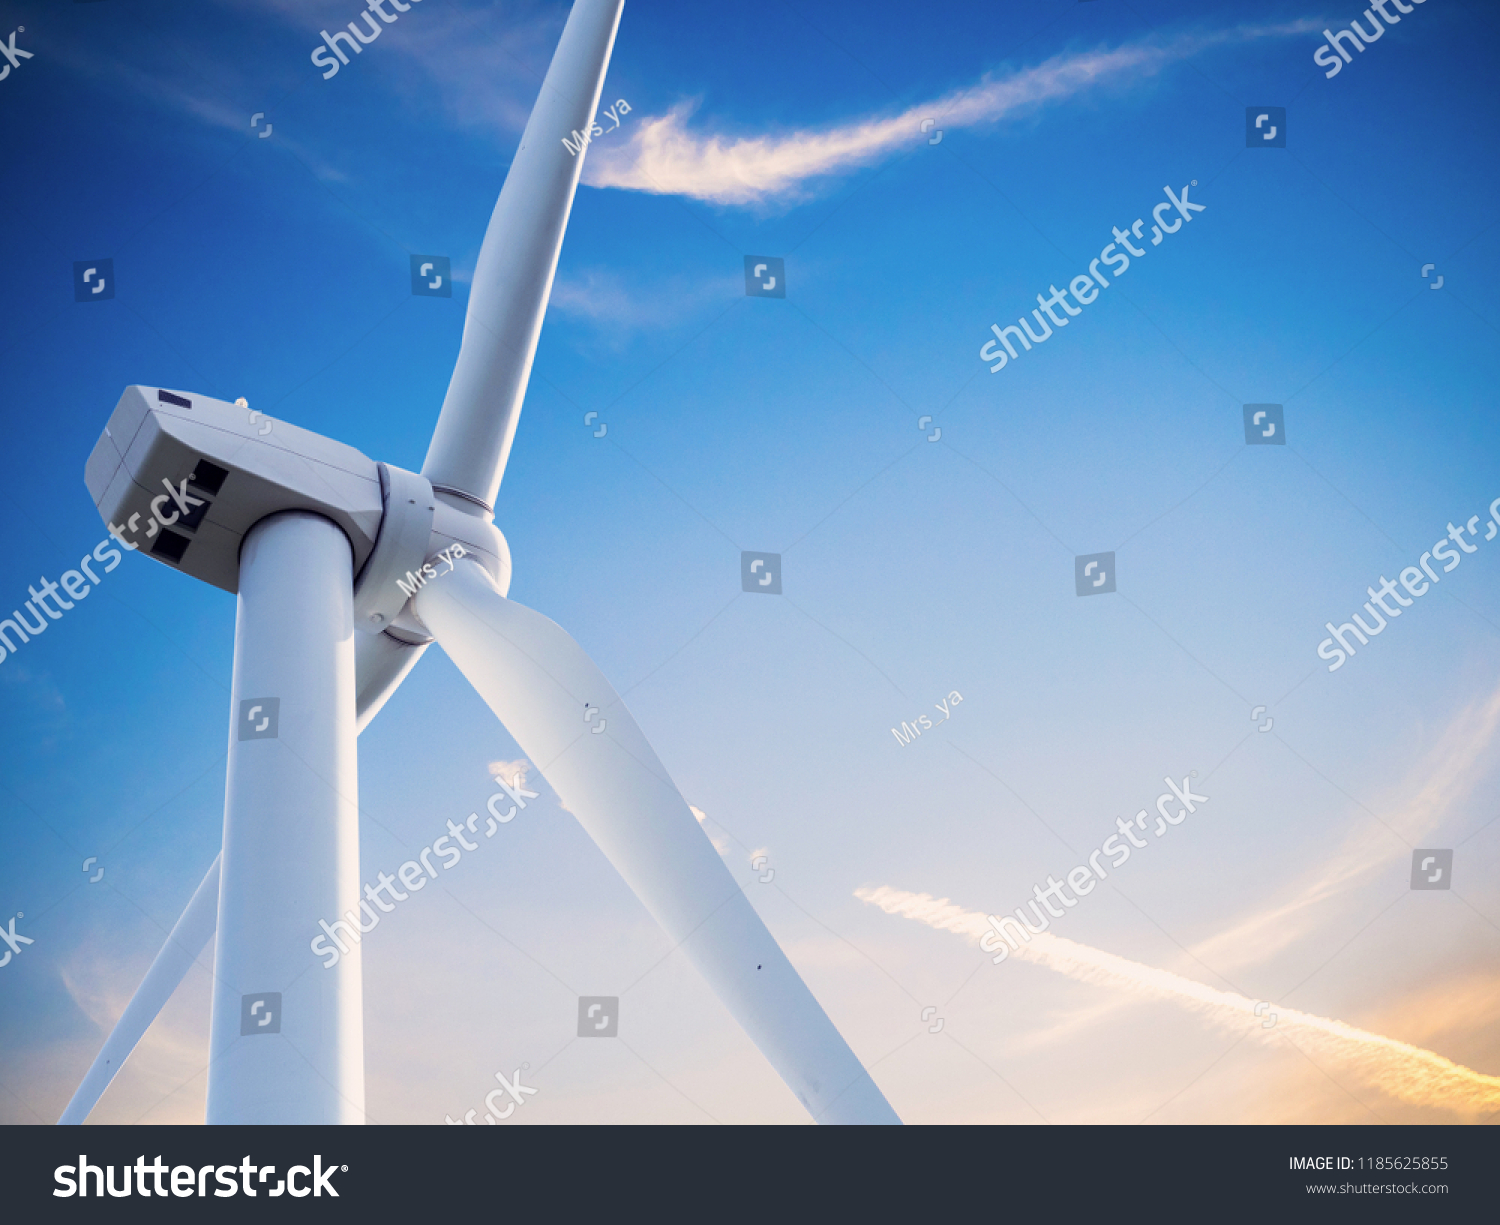 wind mill or also wind-turbine on wind farm in rotation to generate electricity energy on outdoor with sun and blue sky
, conservation and sustainable energy concept. #1185625855